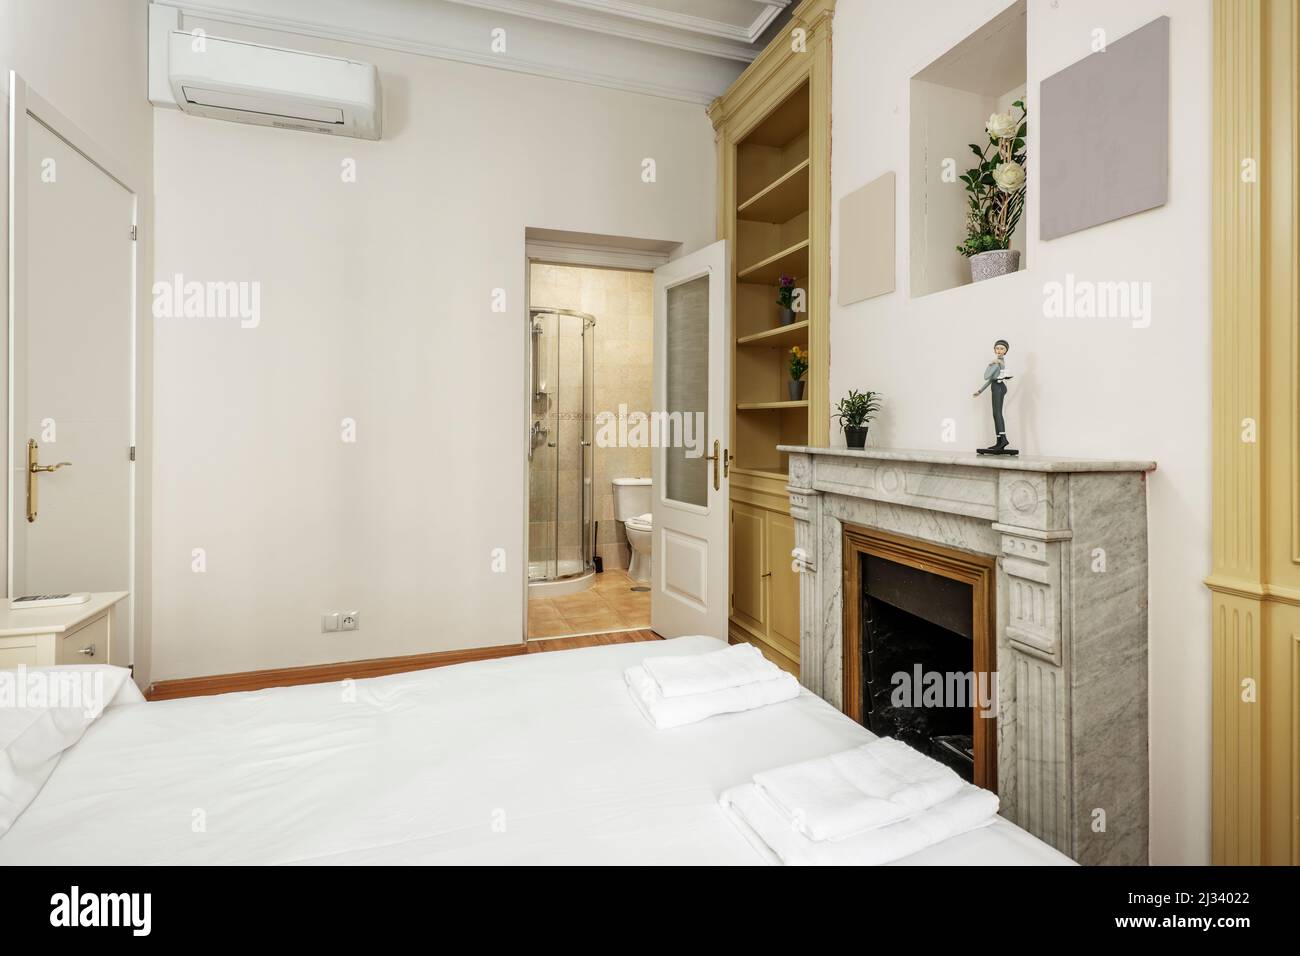 Bedroom with double bed, air conditioning, white marble fireplace, wooden shelves and shower cabin in an en-suite bathroom Stock Photo